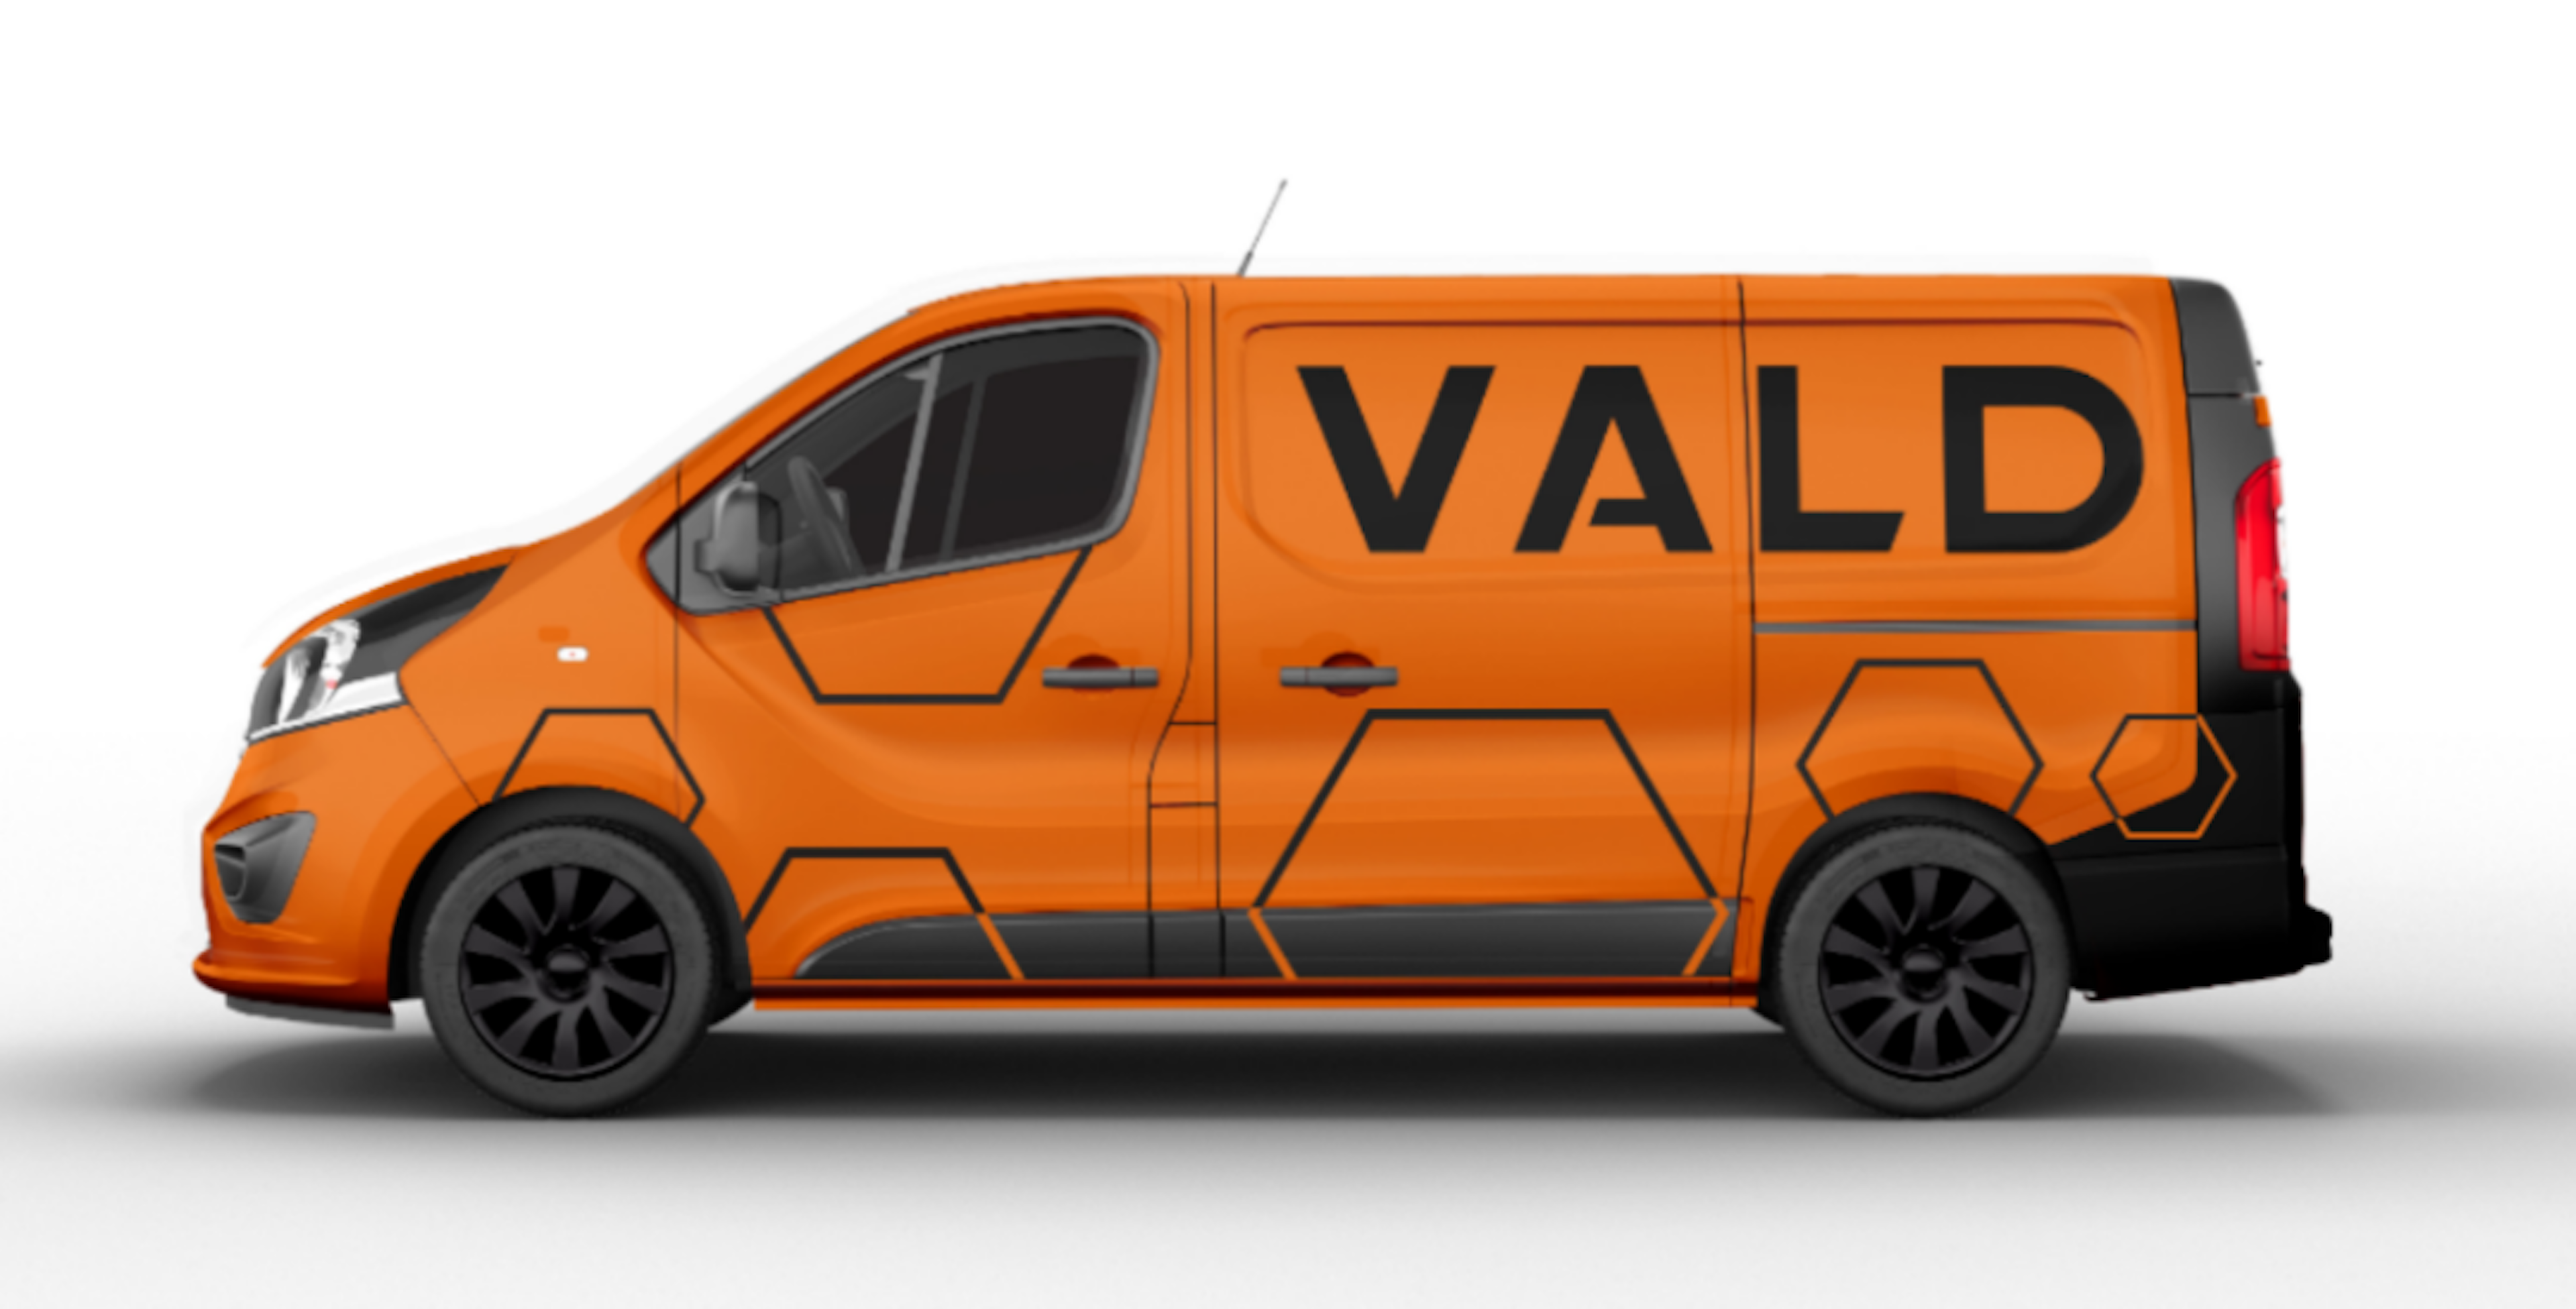 The VALD Van: a mobile athlete testing lab, complete with the full suite of VALD technologies, of course.